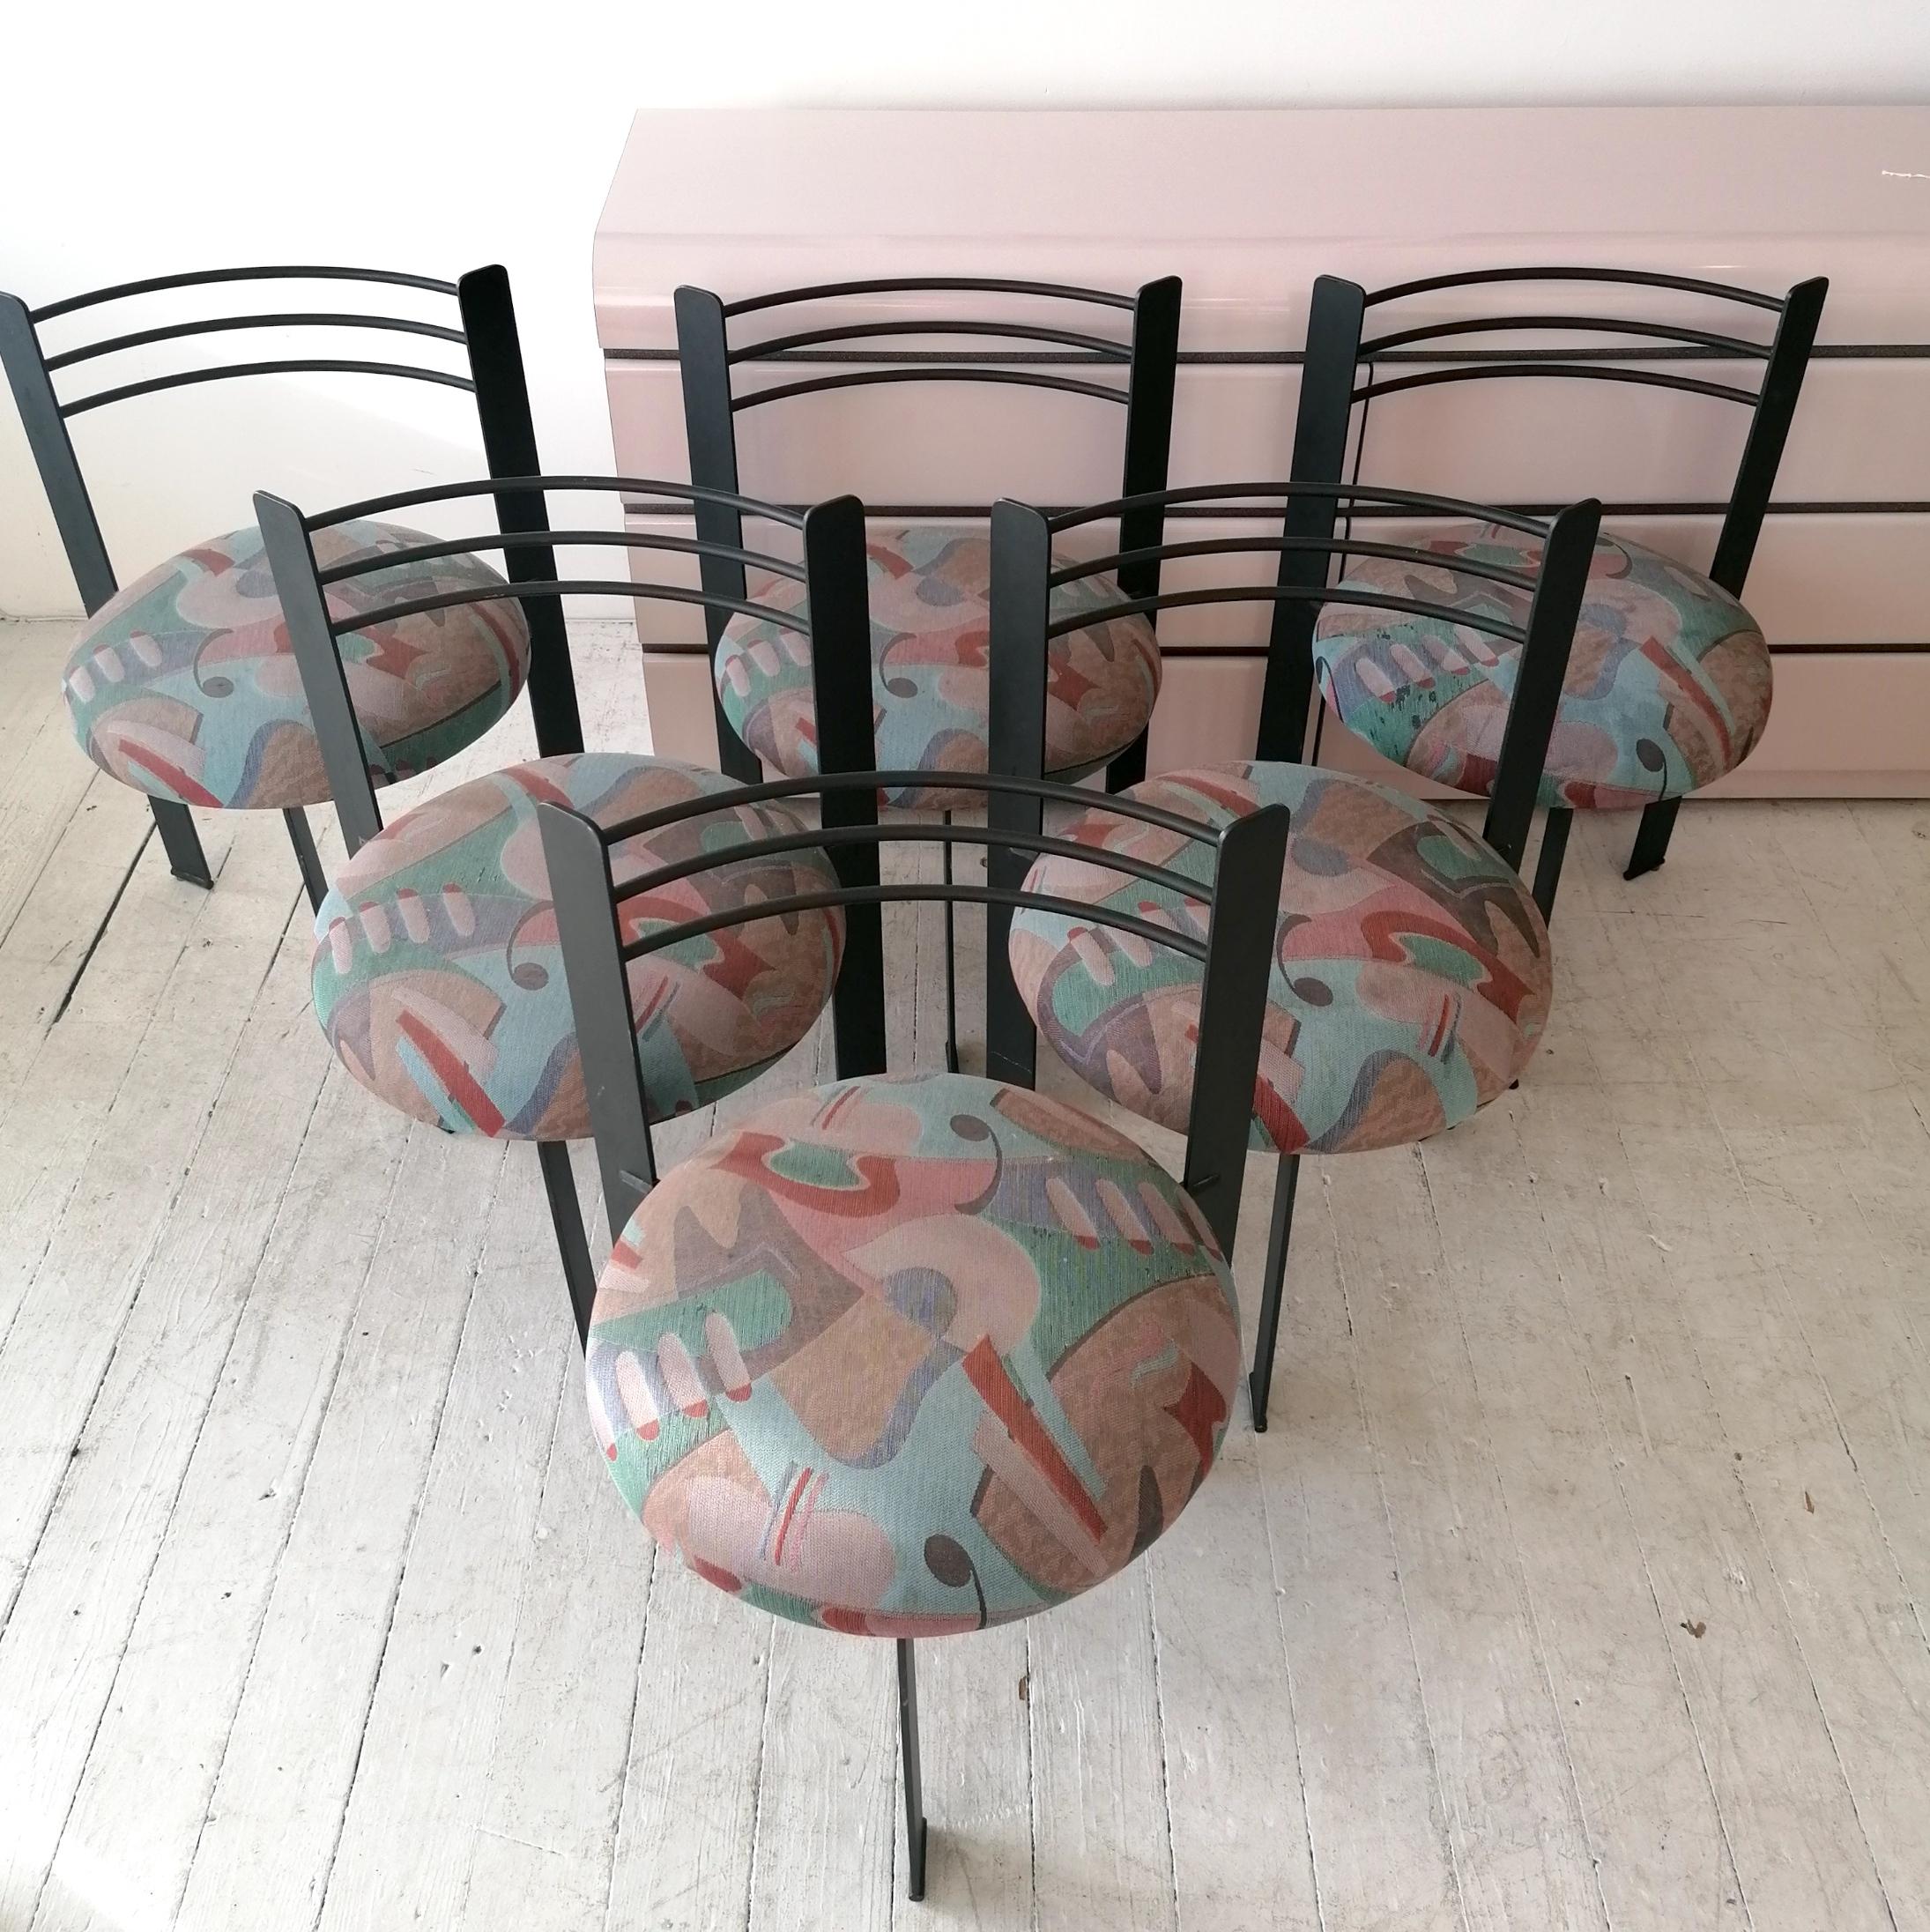 A set of 6 Memphis style postmodern dining chairs, USA 1980s. Heavy powder-coated iron or steel, with original abstract upholstery. There's a little age-related wear to the fabric, but it's still entirely useable- such a great pattern!

We also have